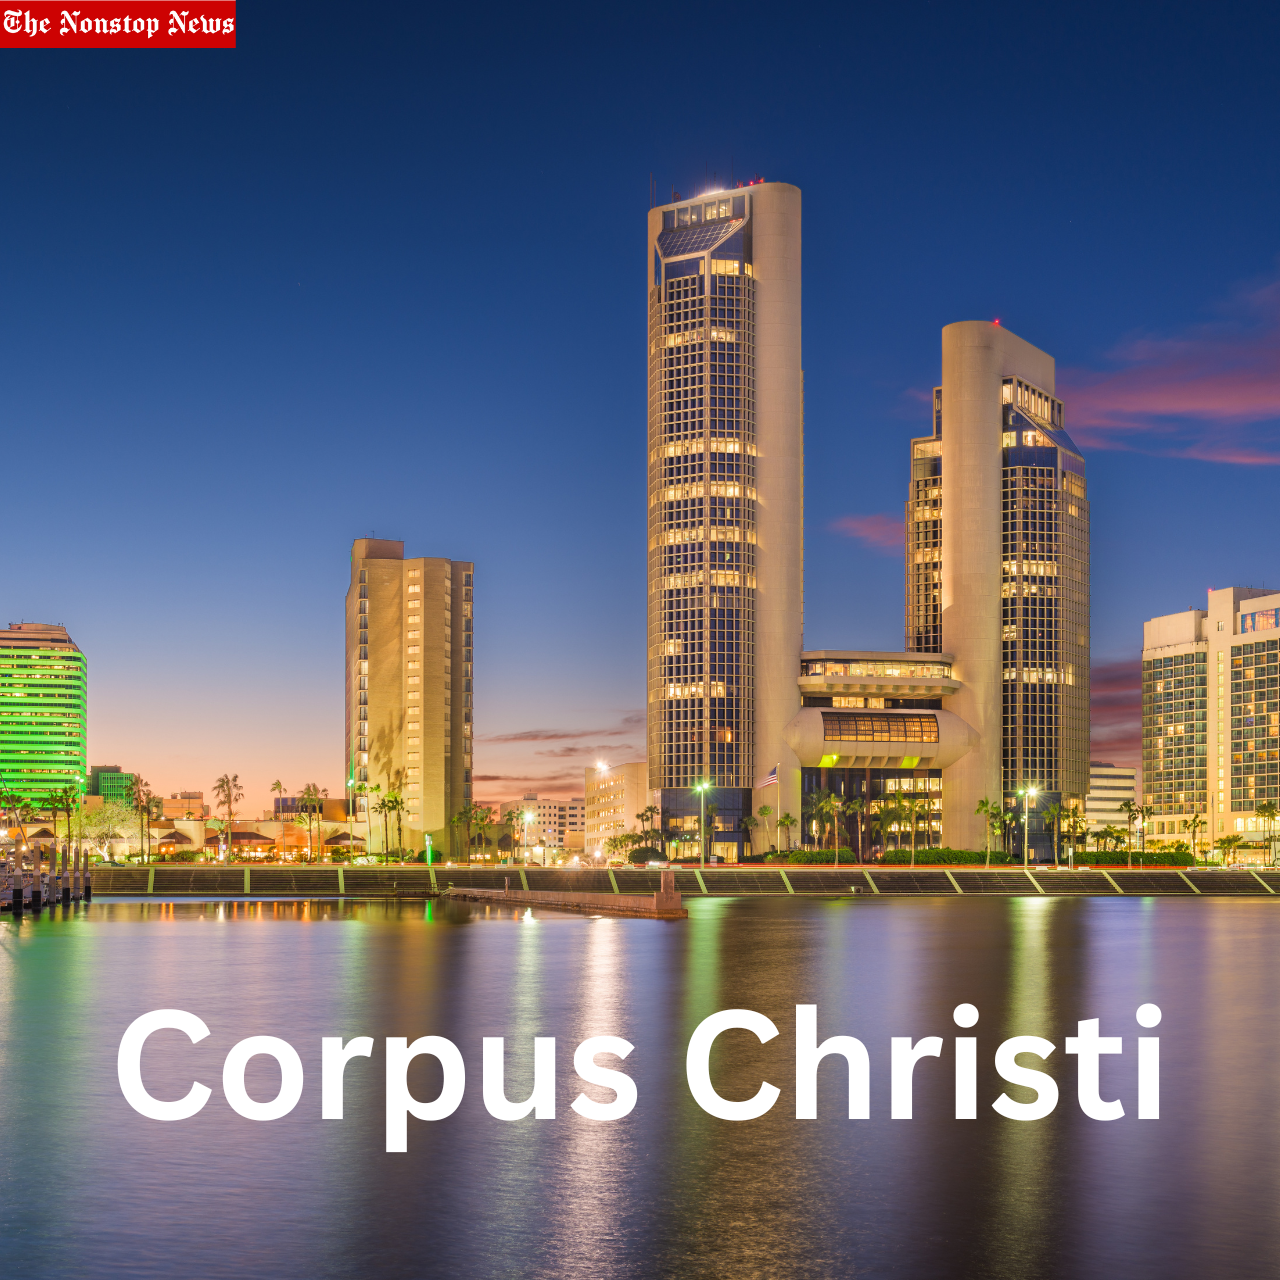 Corpus Christi 2023 Quotes, Images, Banners, Messages, Sayings, Wishes, Greetings, Posters, and Slogans